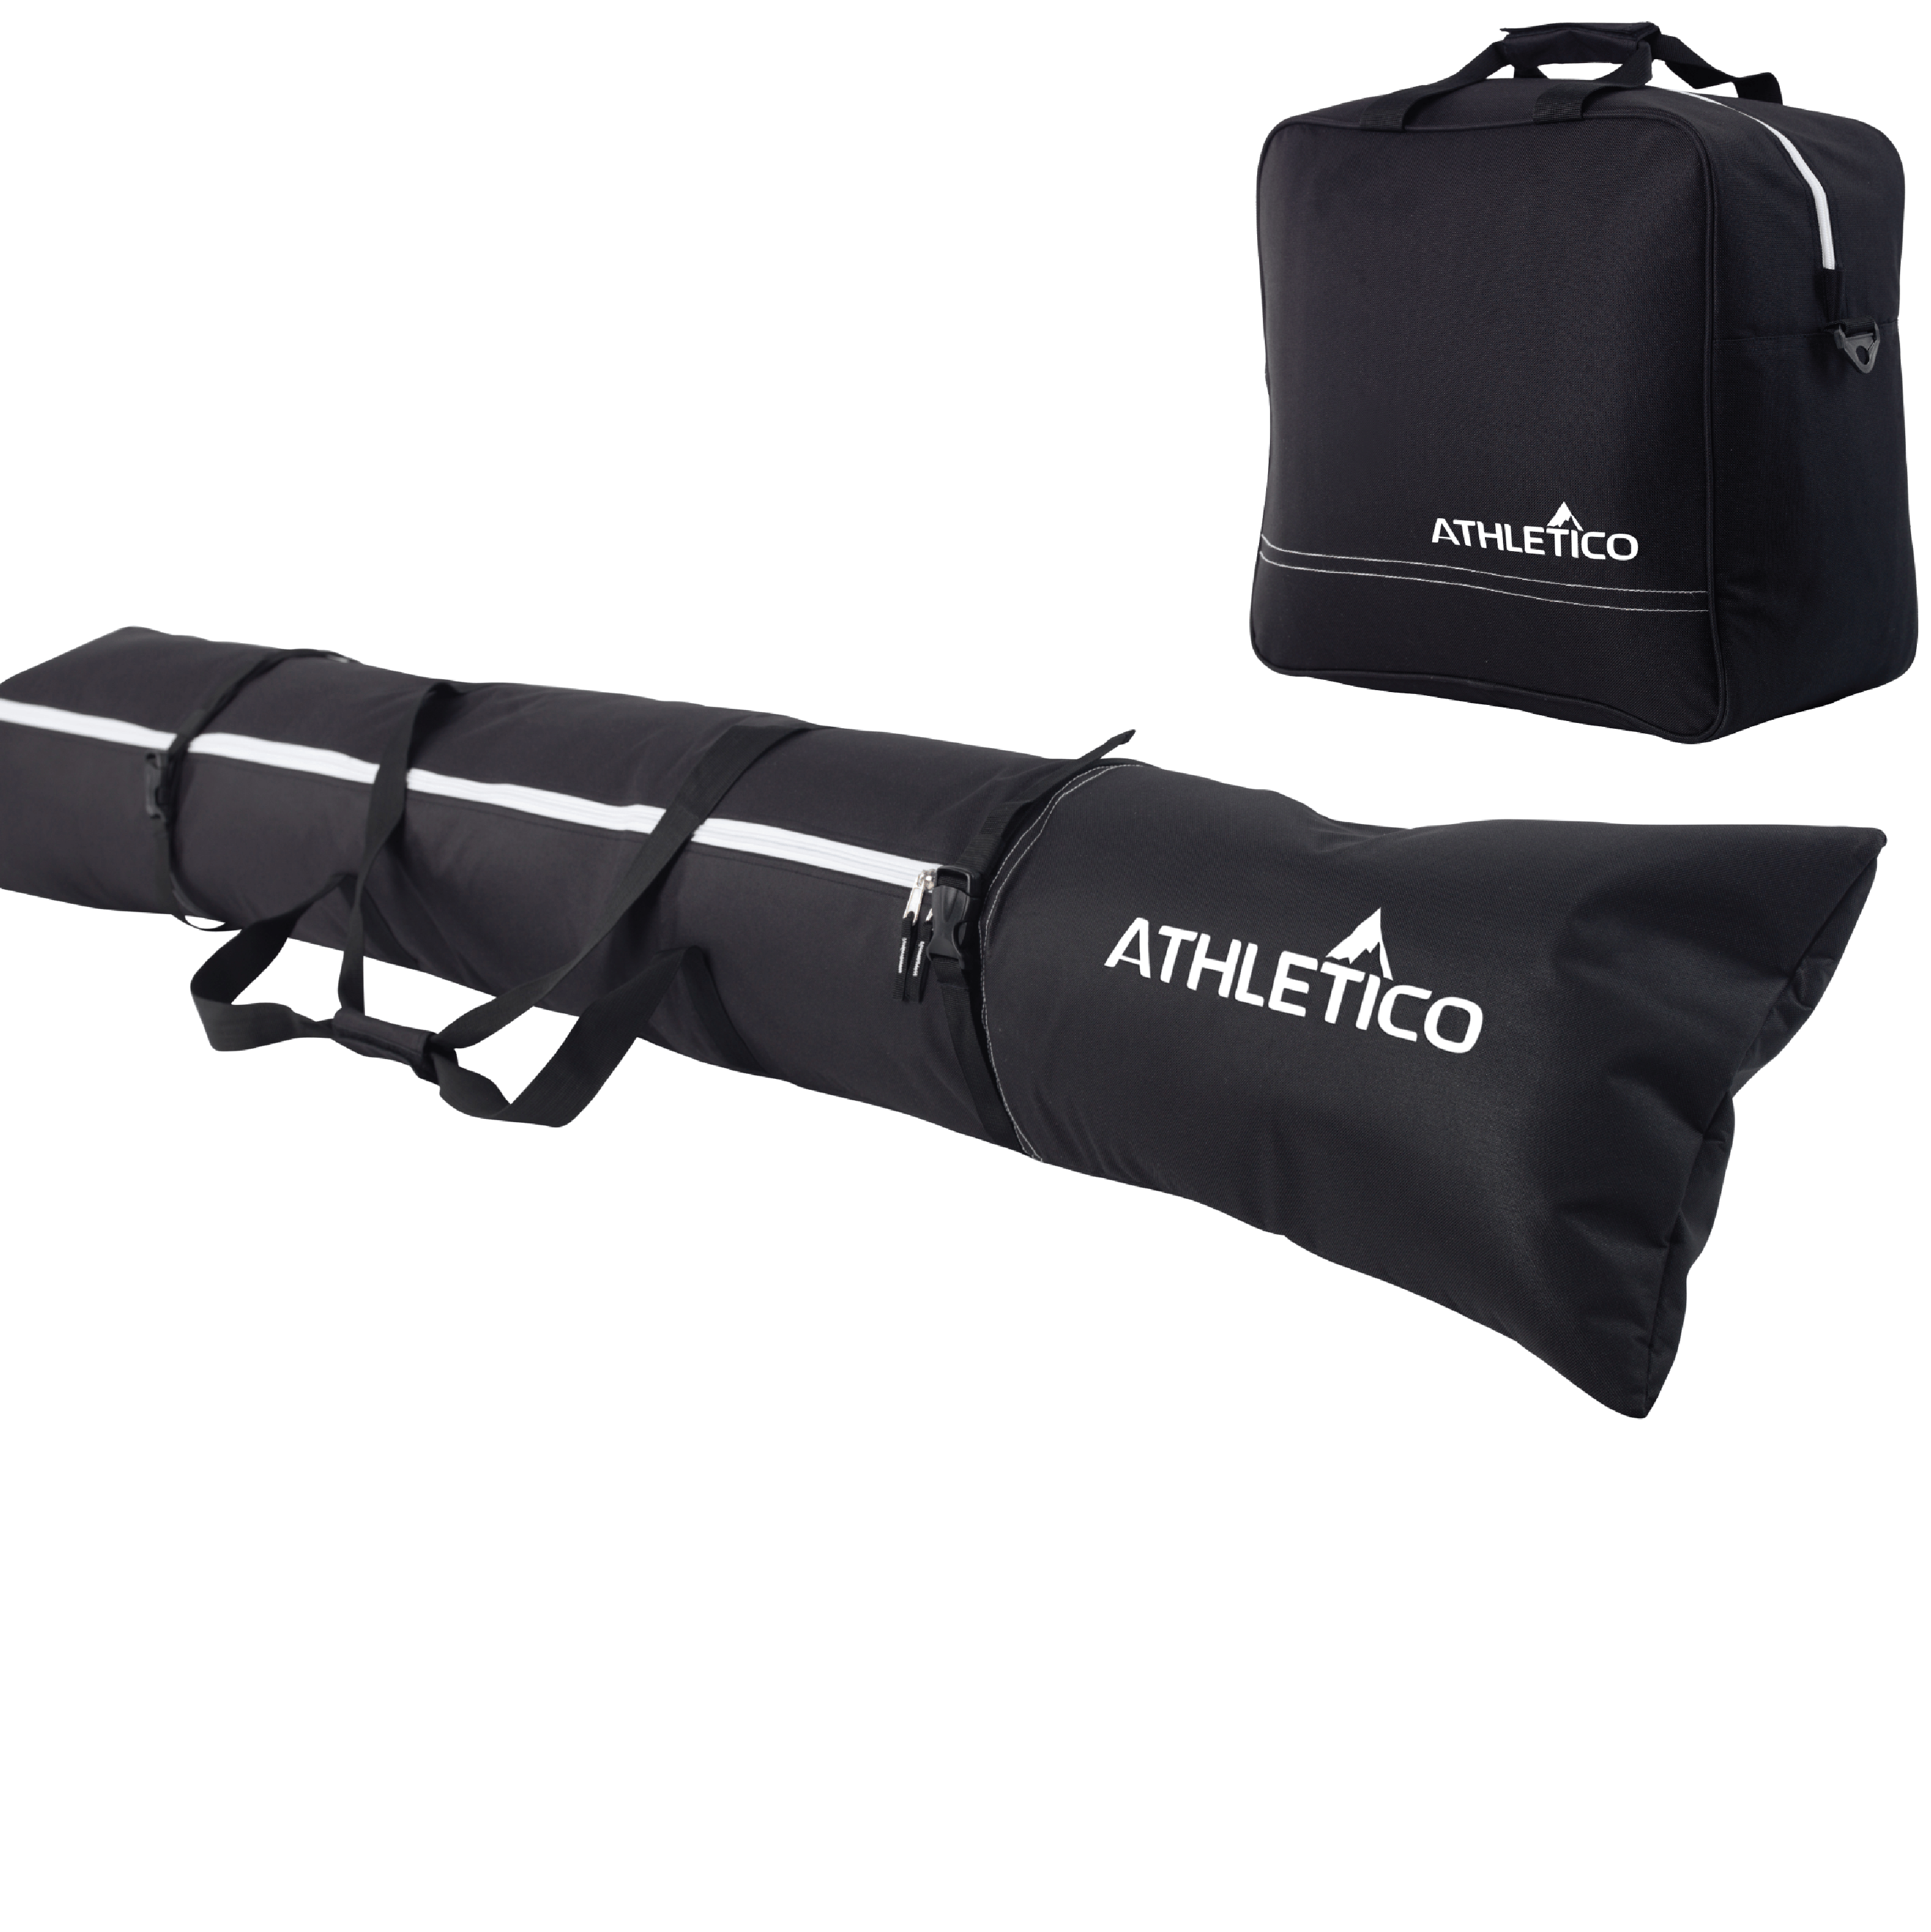 Broer terras Aanvulling Athletico Padded Two-Piece Ski and Boot Bag Combo | Athletico